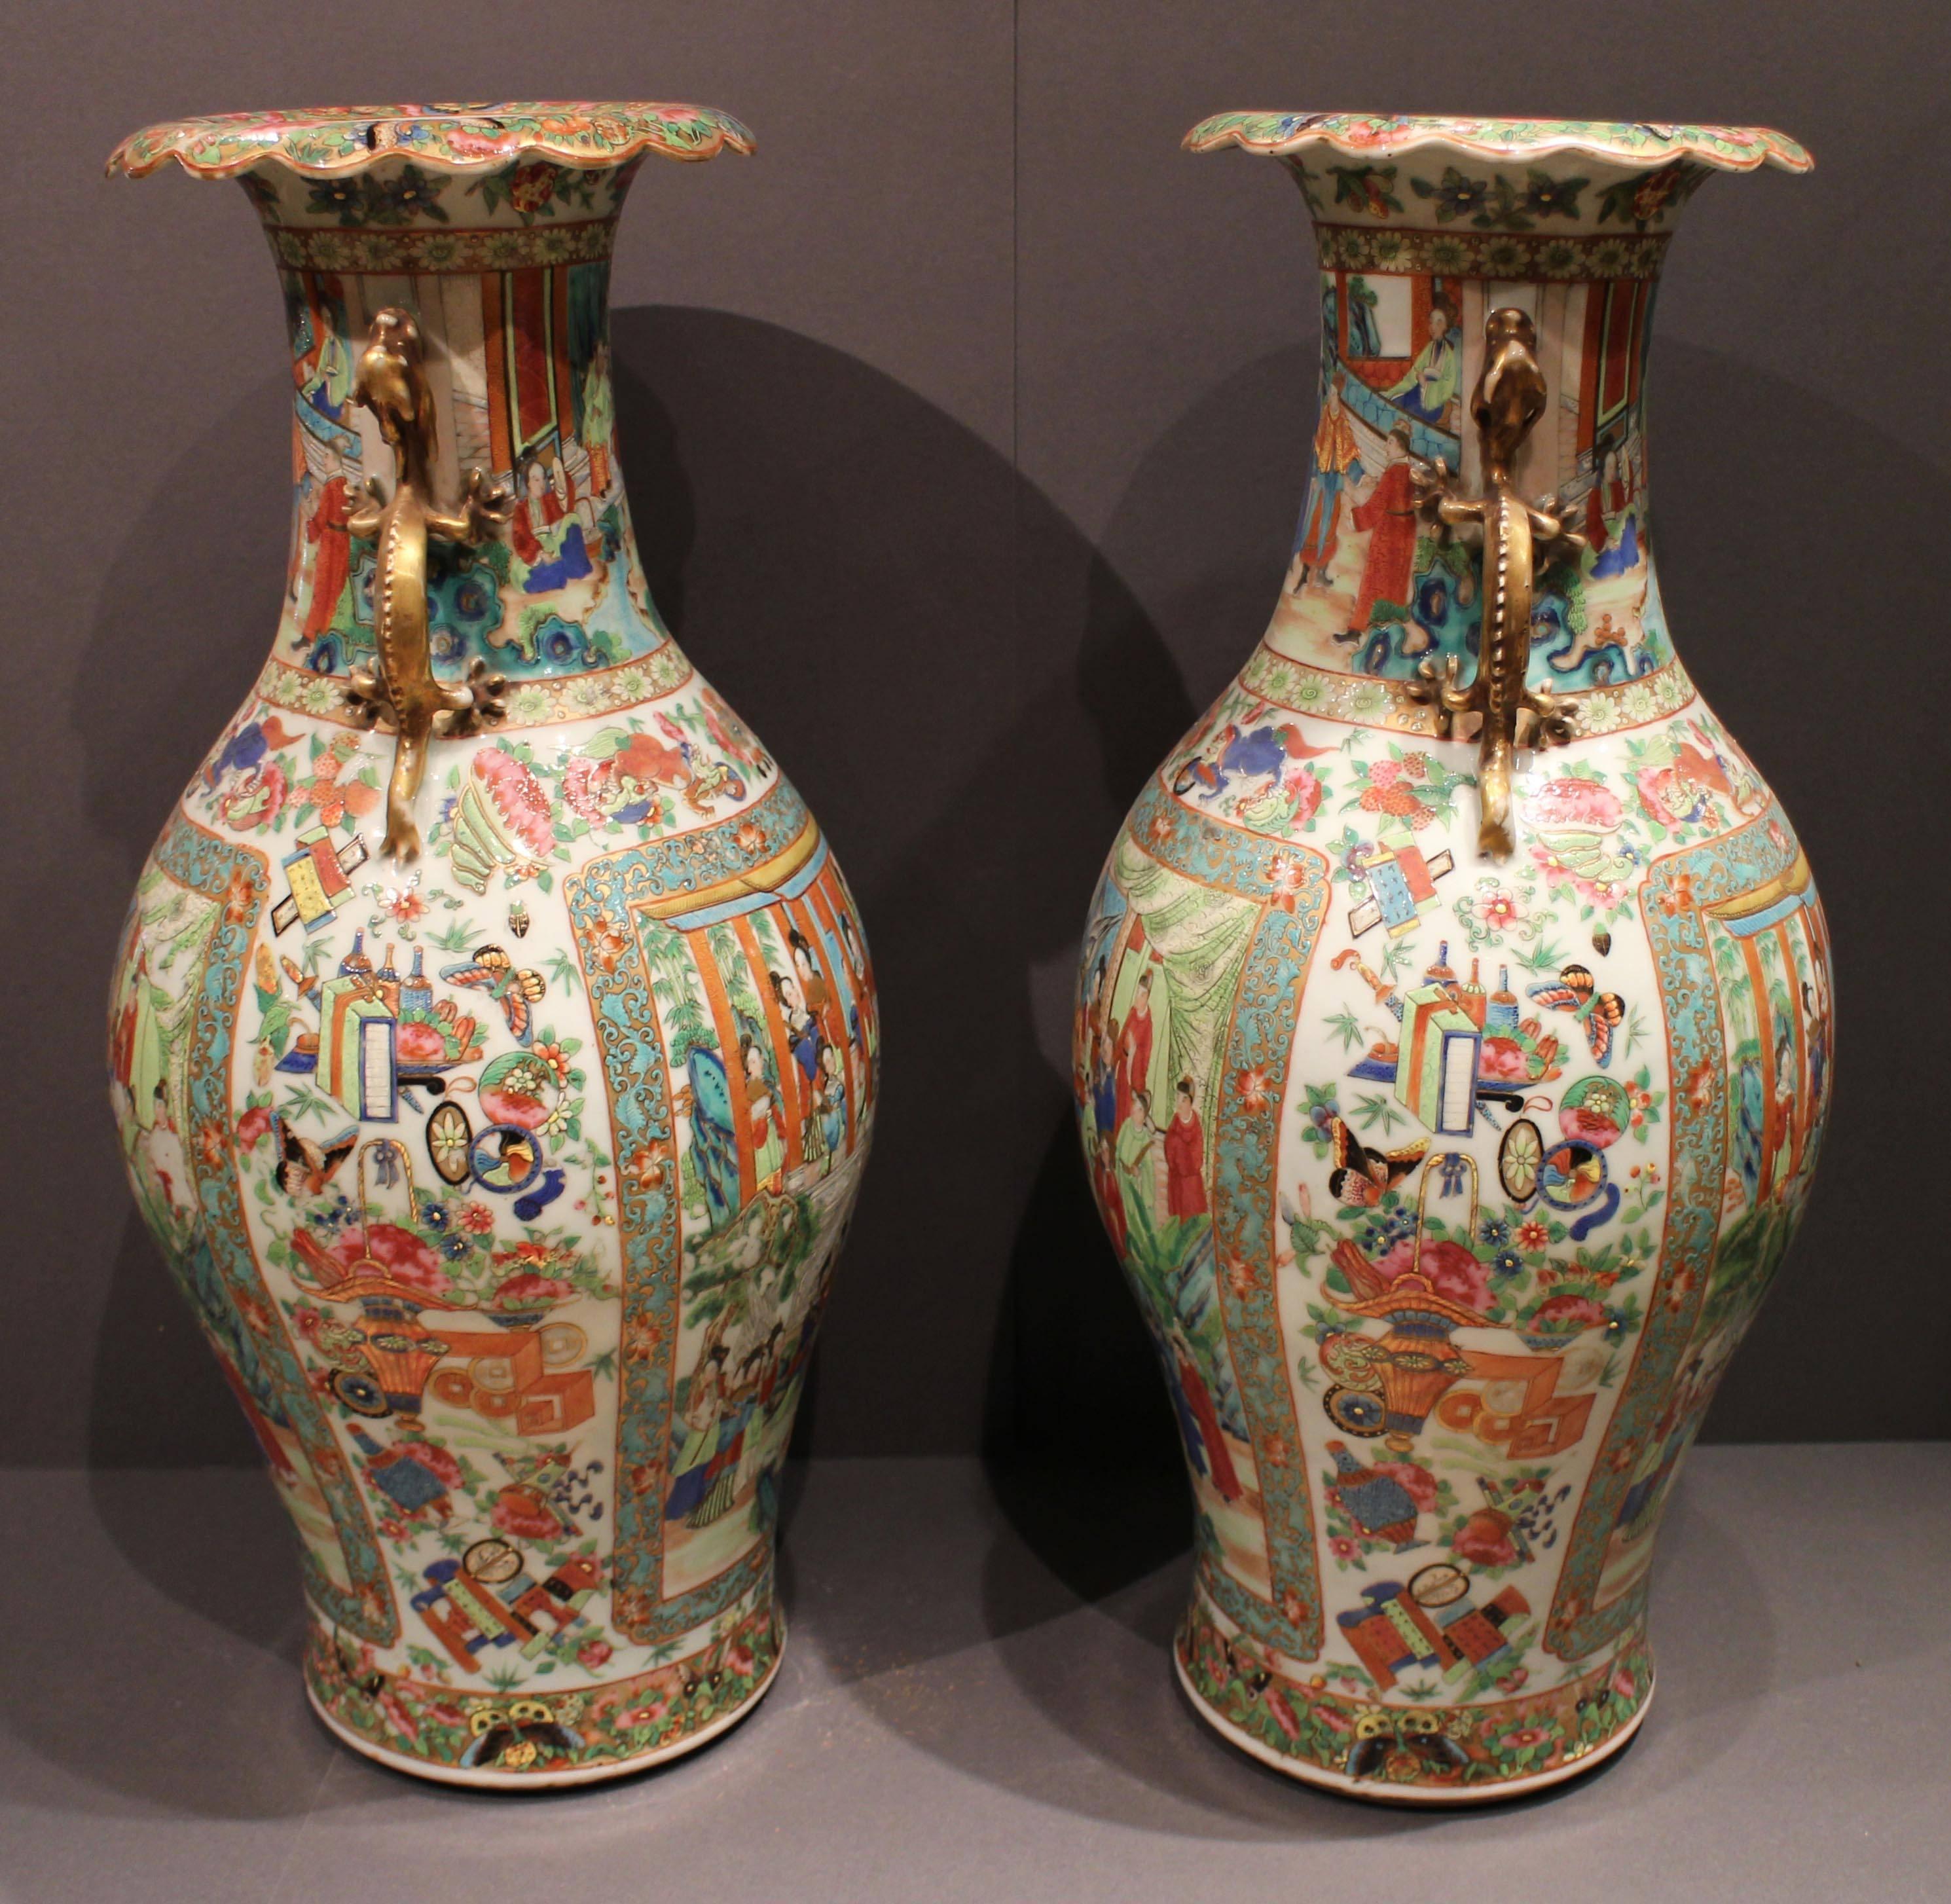 A pair of large antique Chinese Cantonese vases with golden dragon ears, the vases are decorated with a bold and colorful design of precious objects on a cream background, and large panels in the traditional Canton color pallet, depicting meetings